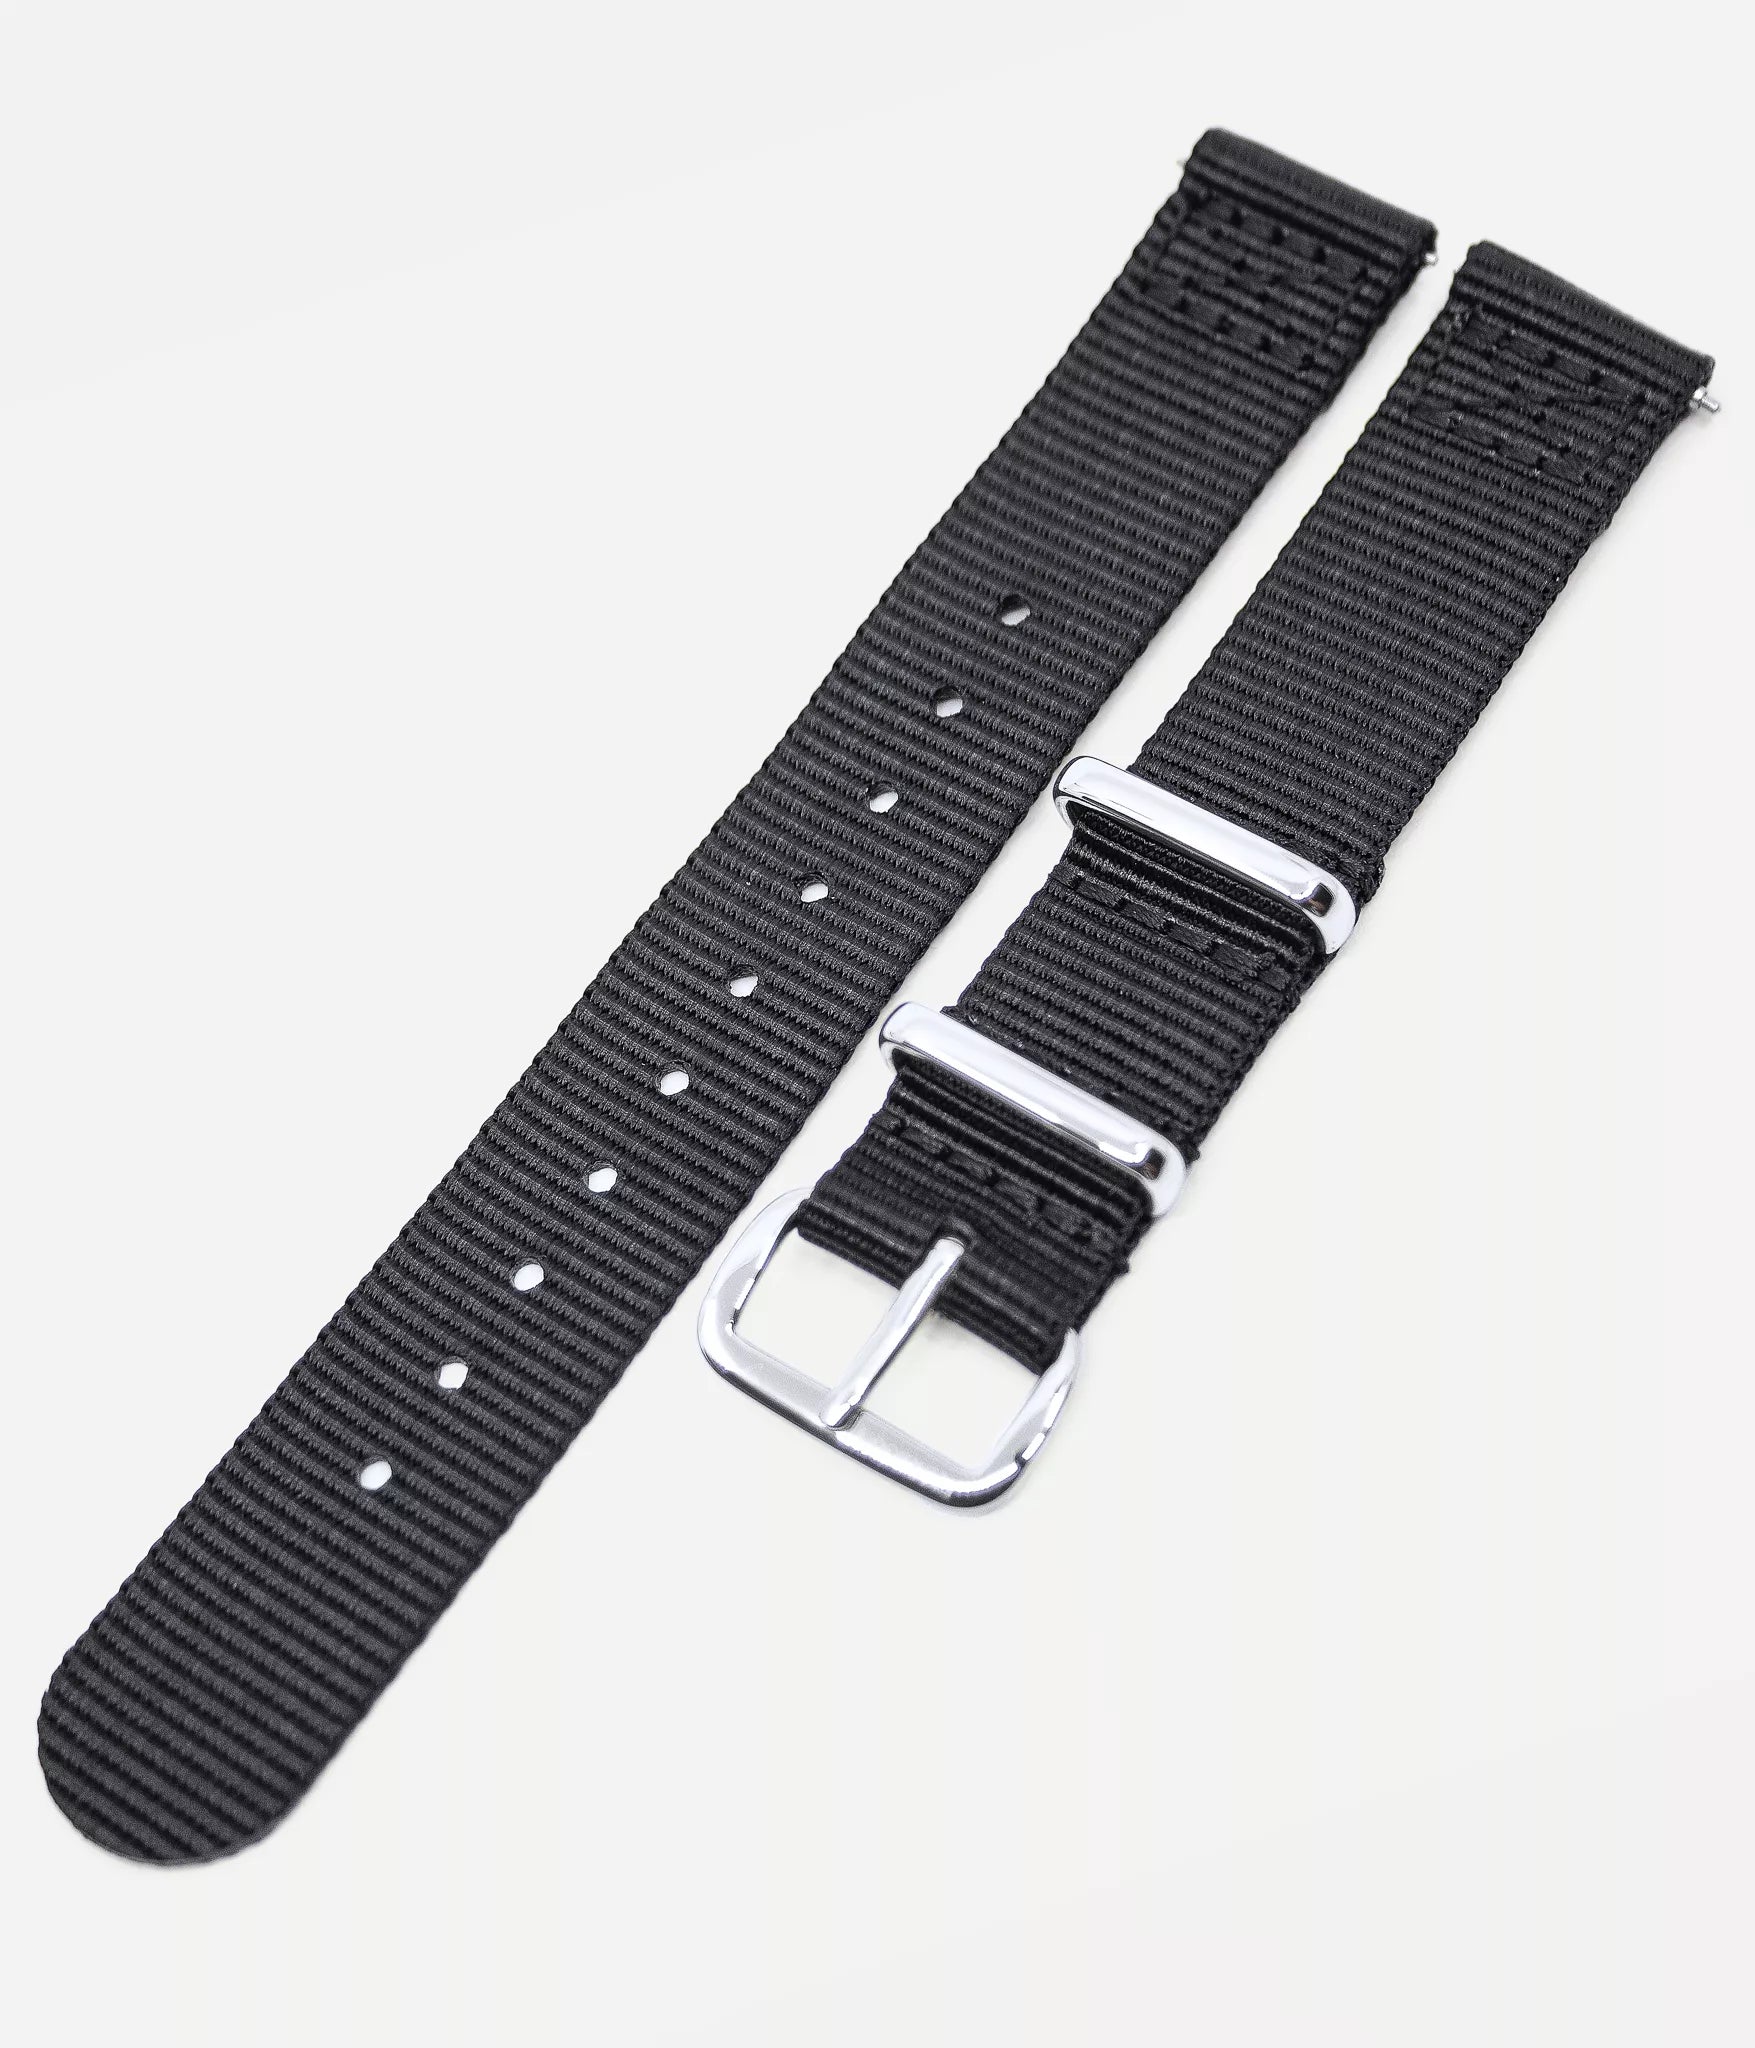 Watch strap shot - Fjordson matching watches with black dial and black NATO nylon watch strap - Couple Watches Gift set - vegan & approved by PETA - Swiss made